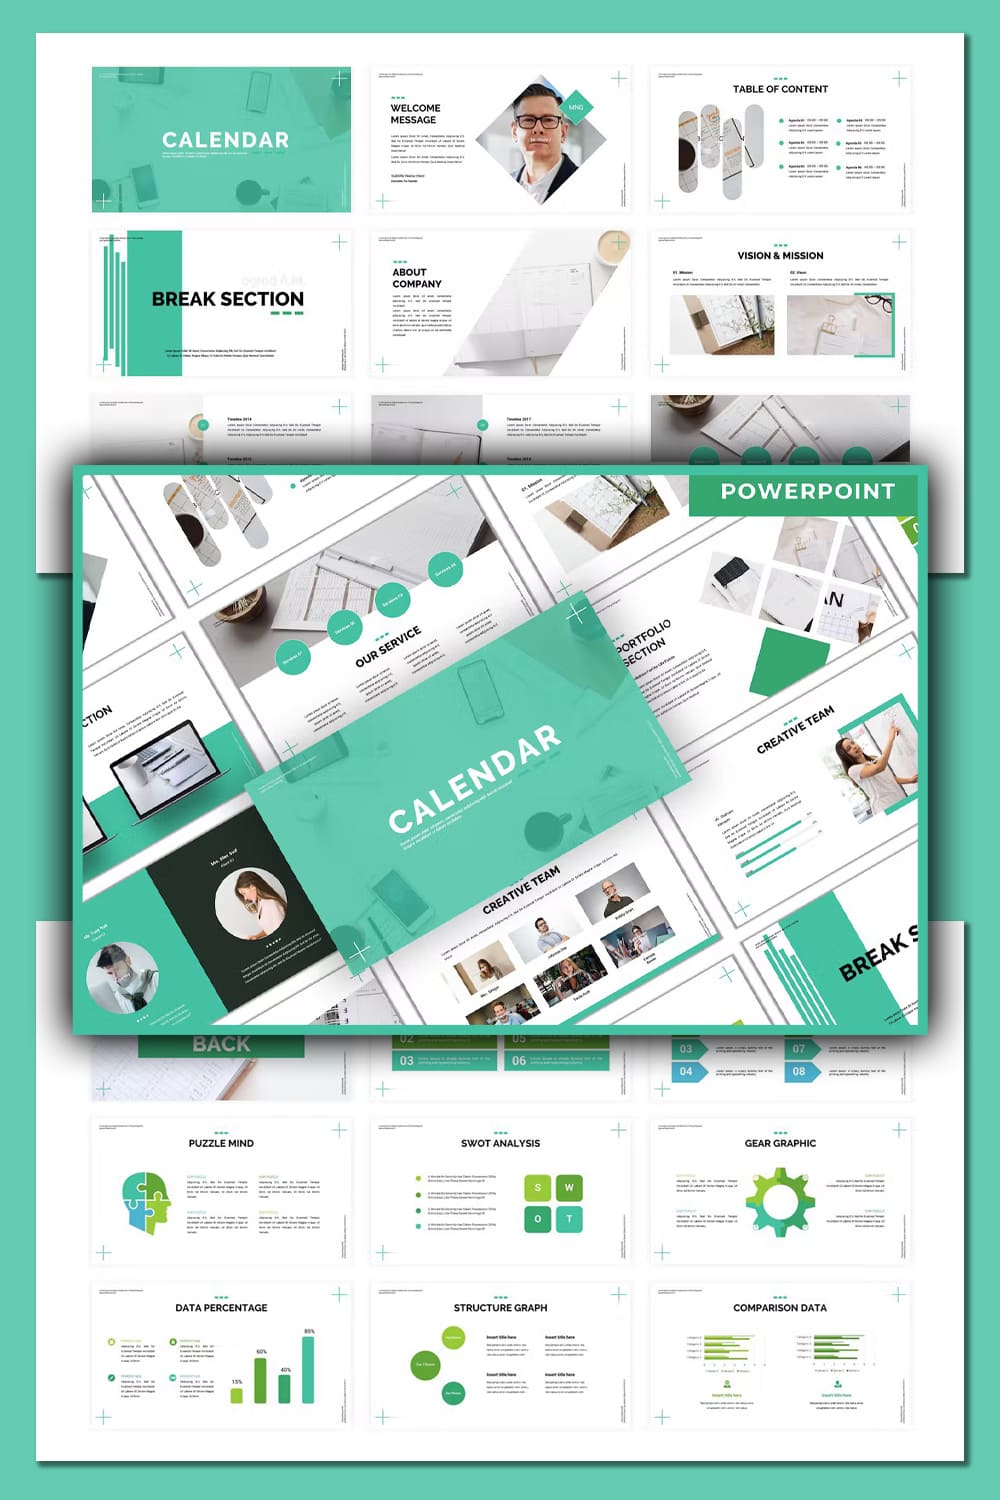 A selection of images of enchanting business presentation template slides.